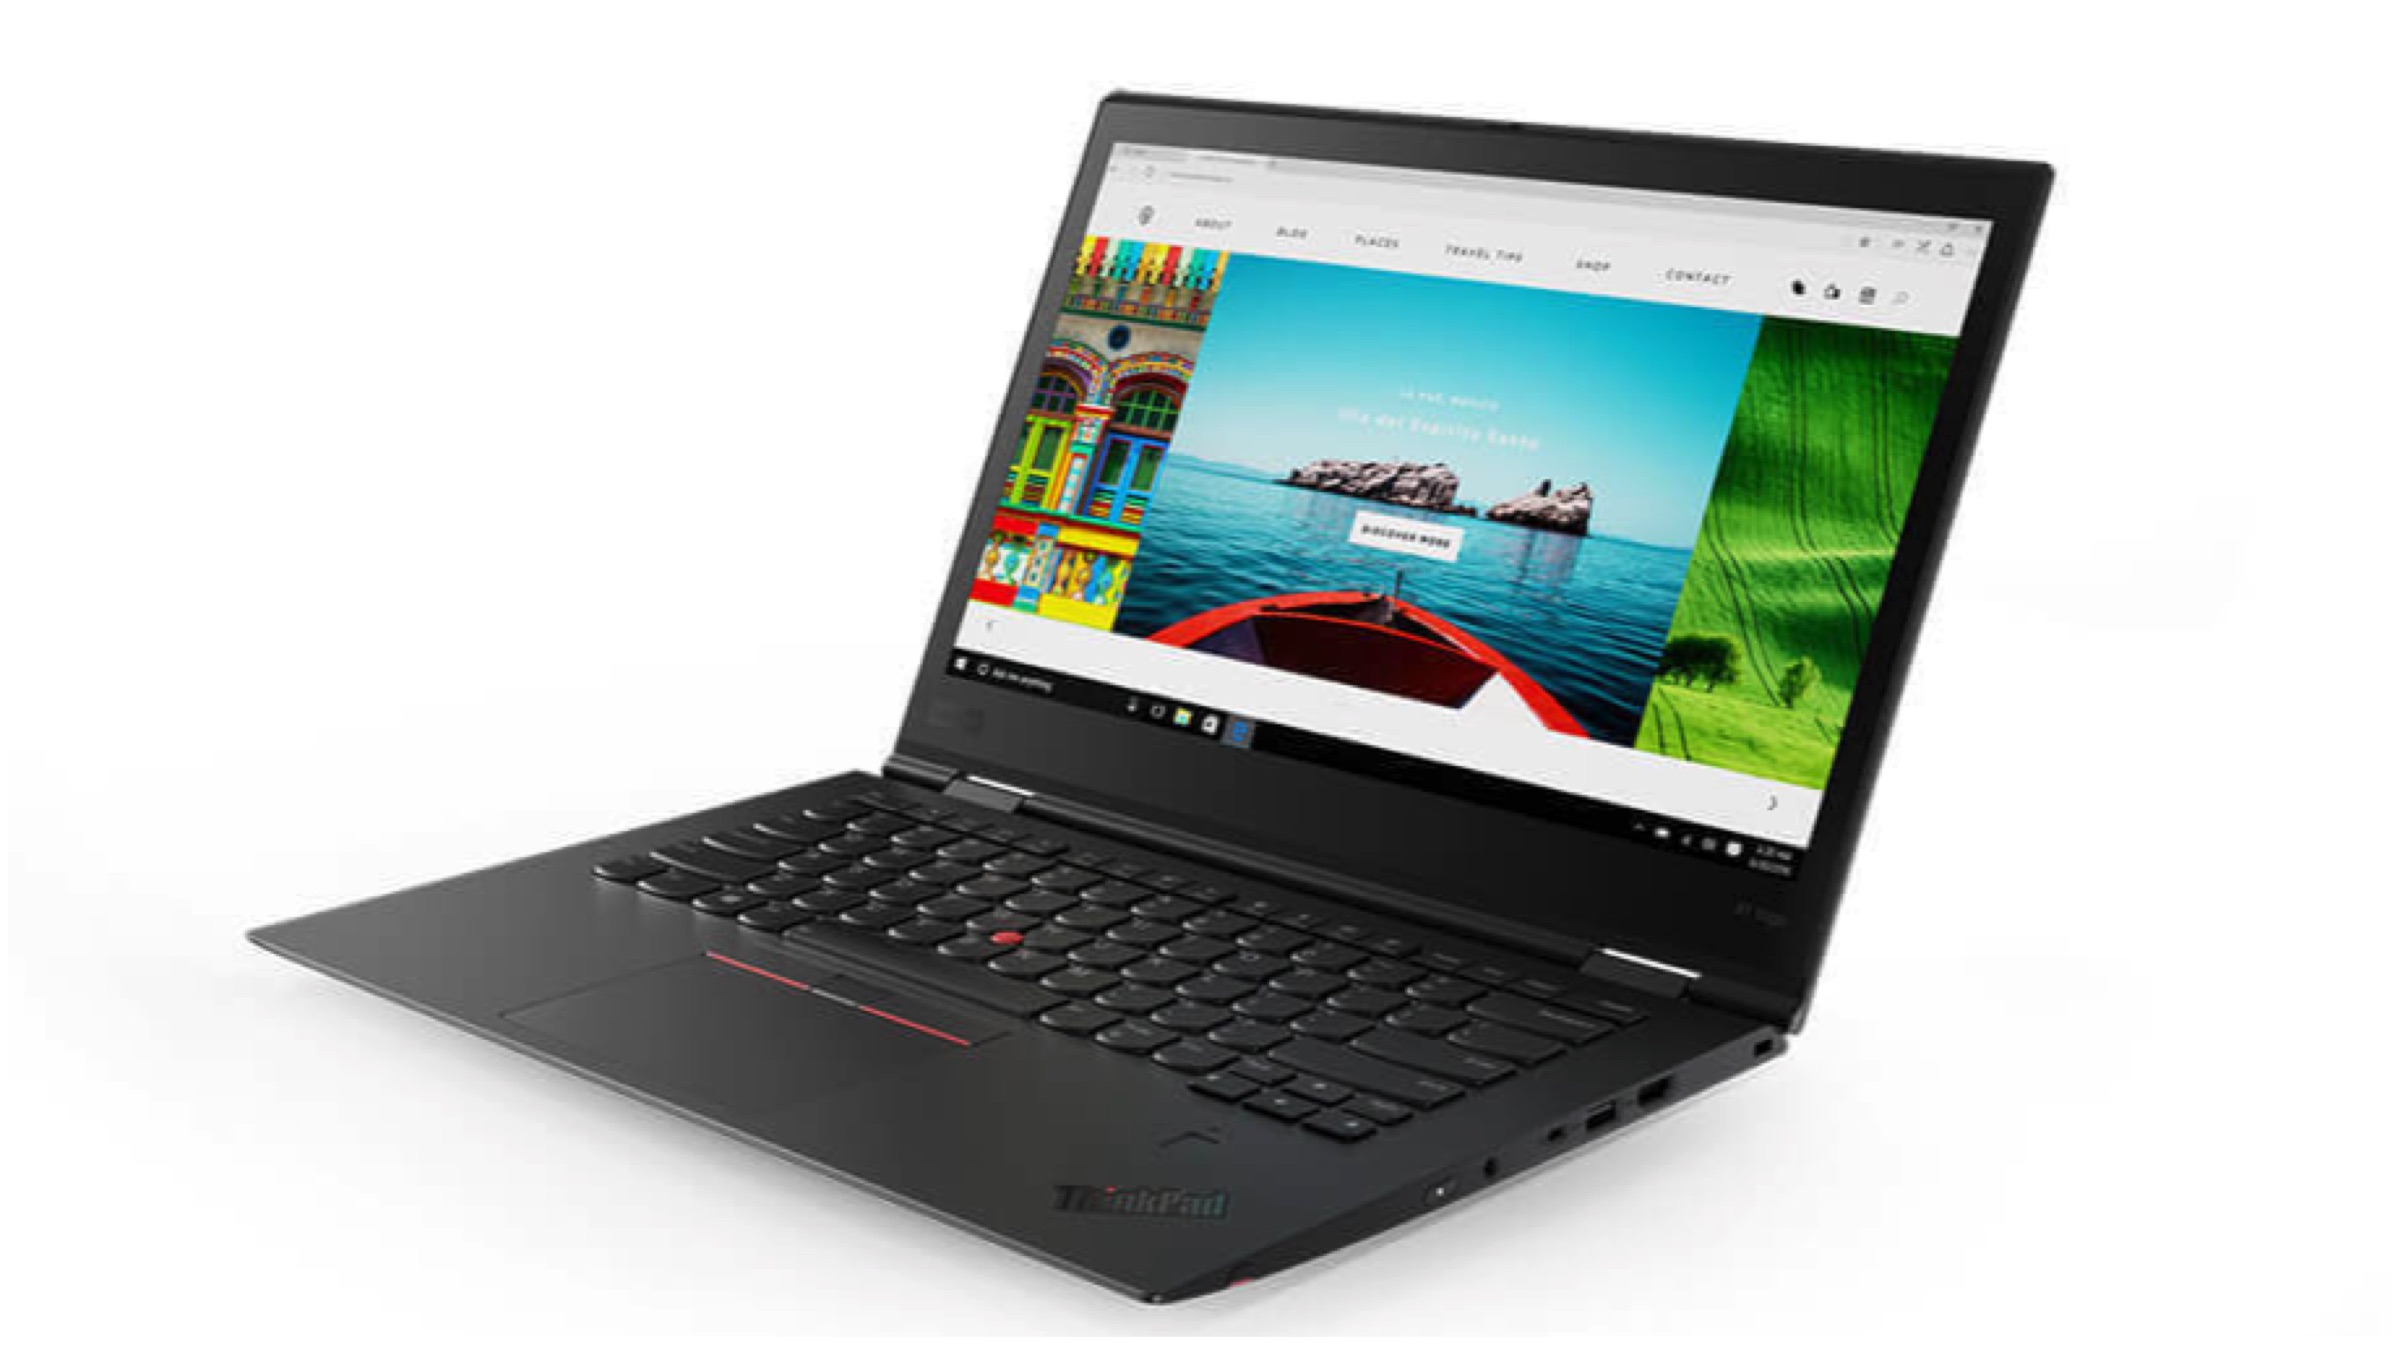 Lenovo Made To Order Custom Laptops In India, Full Details | iGyaan